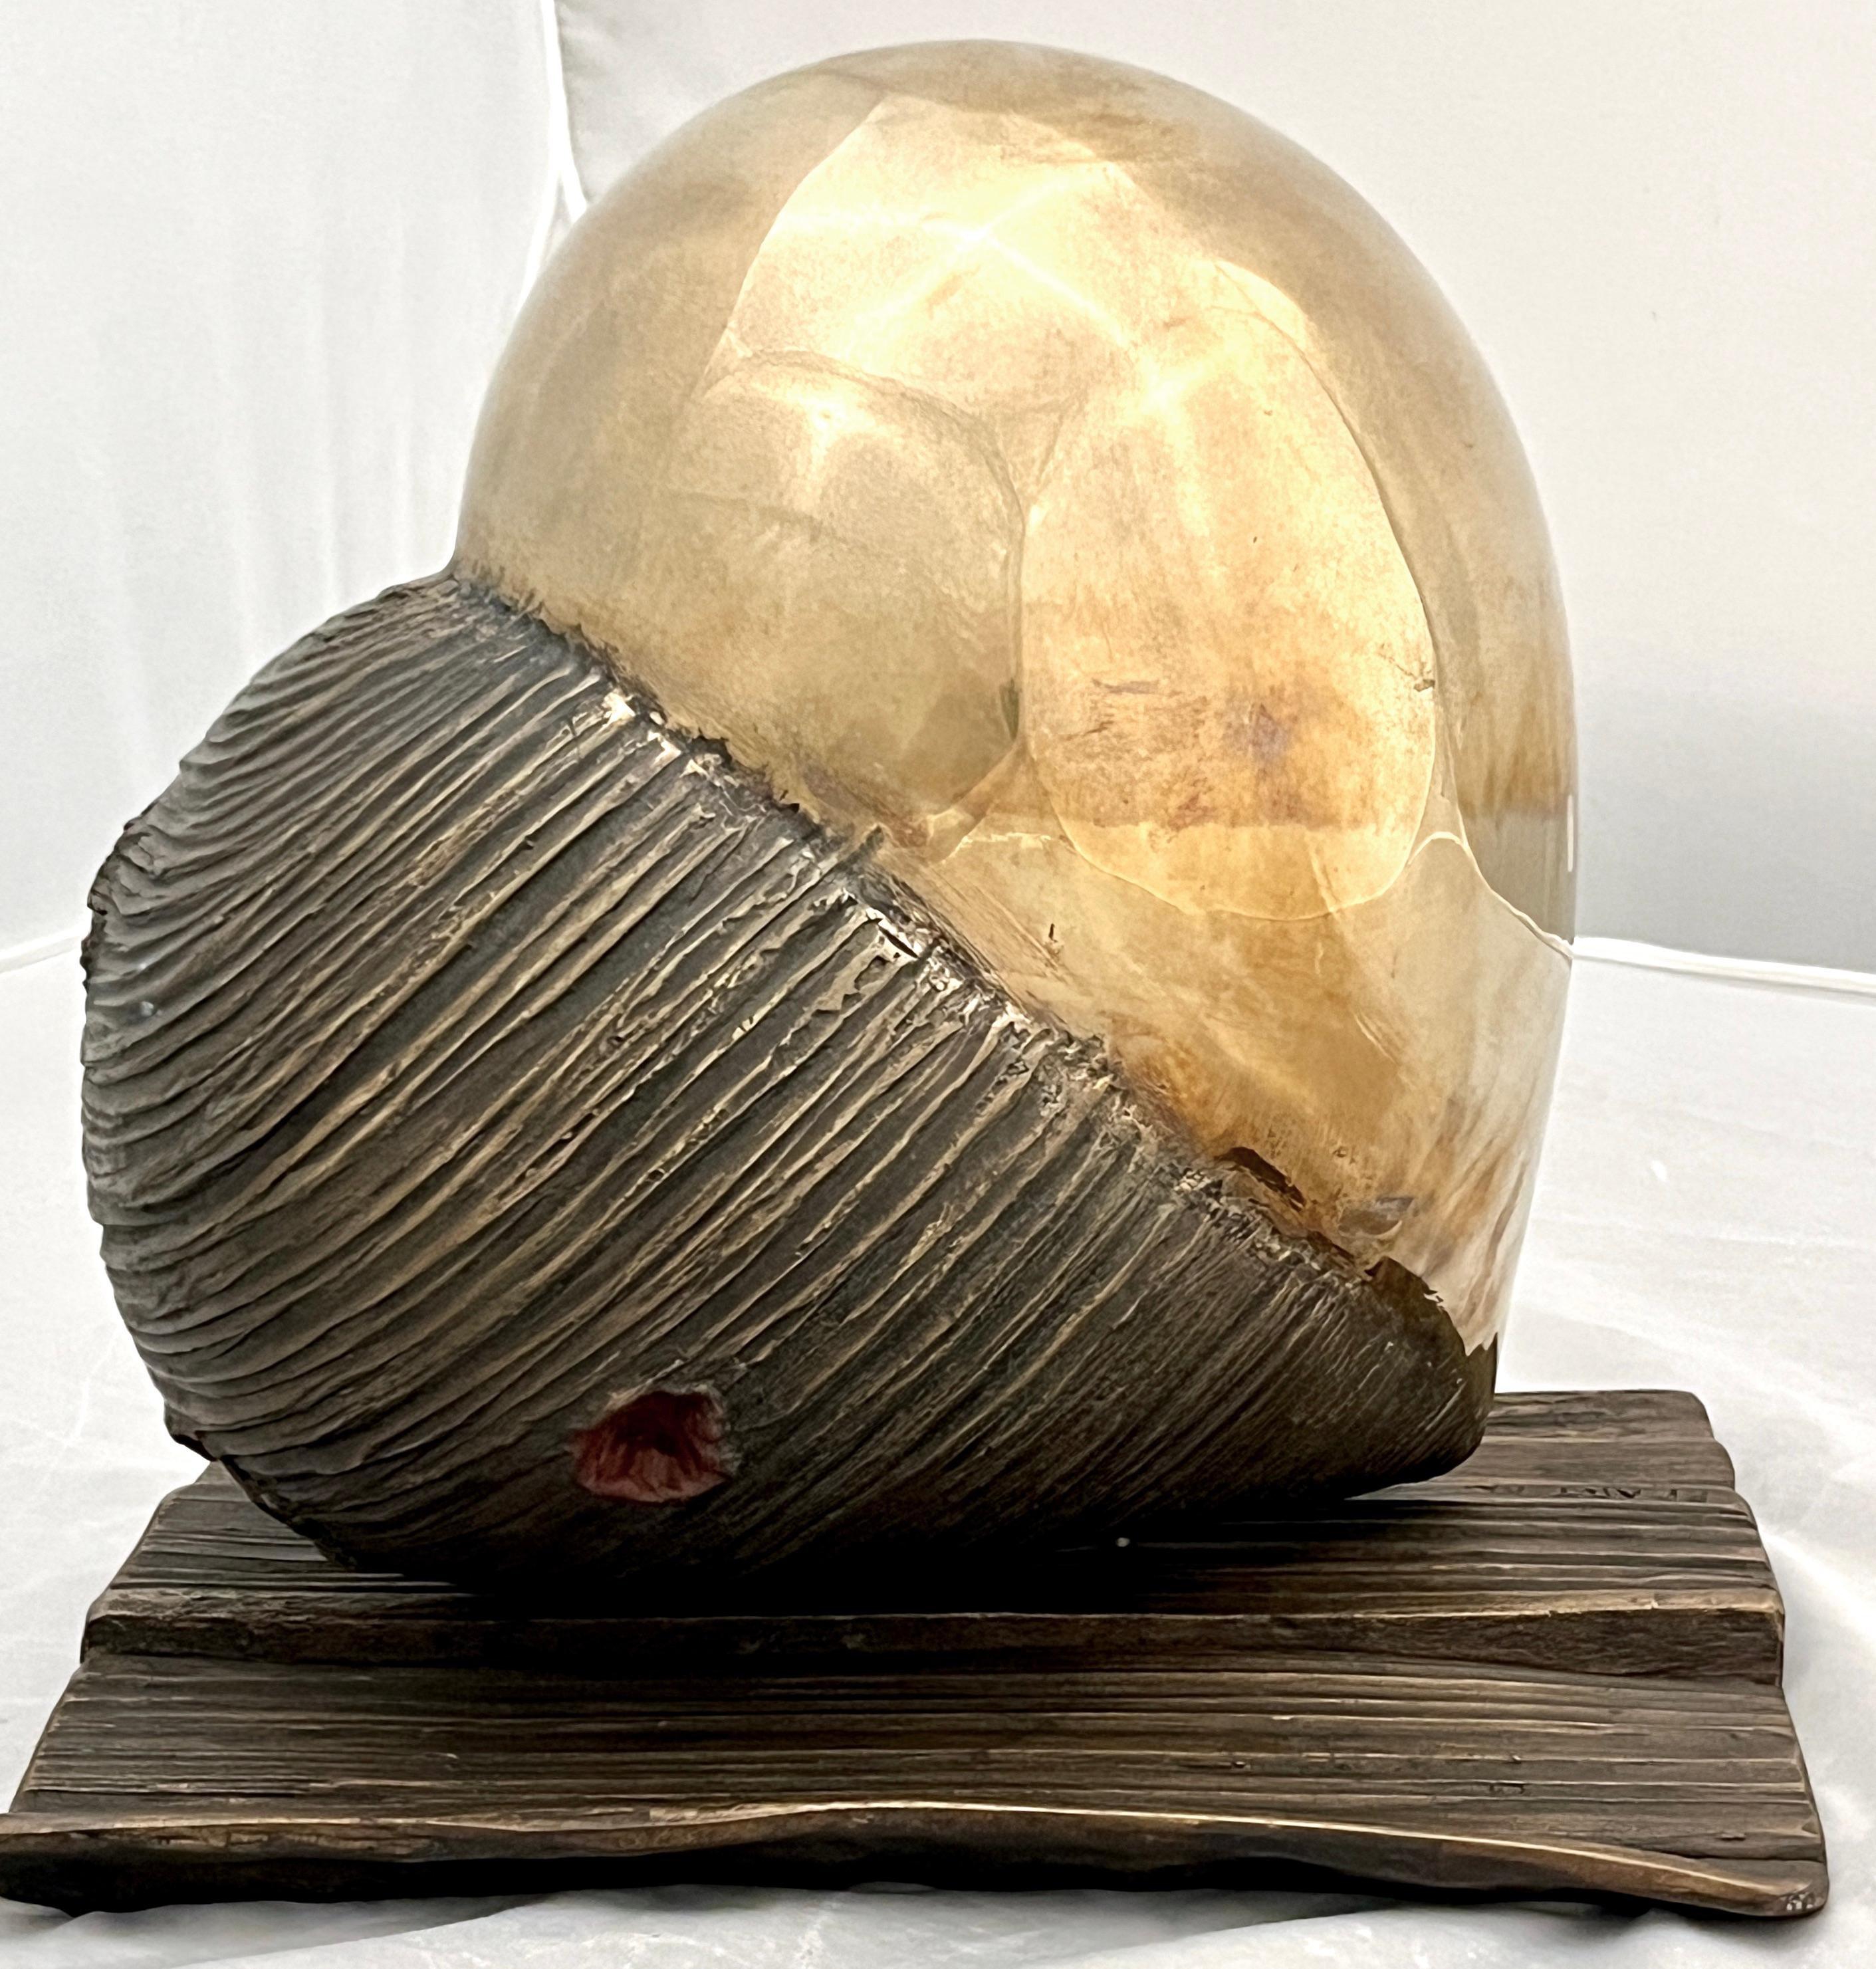 This contemporary Italian sculpture, a Work of Art by the woman artist Monica Foglia, represents a human heart sculpted in bronze. The 2 finishes, half in polished gold bronze and the other half in textured rough bronze tell our story of simple